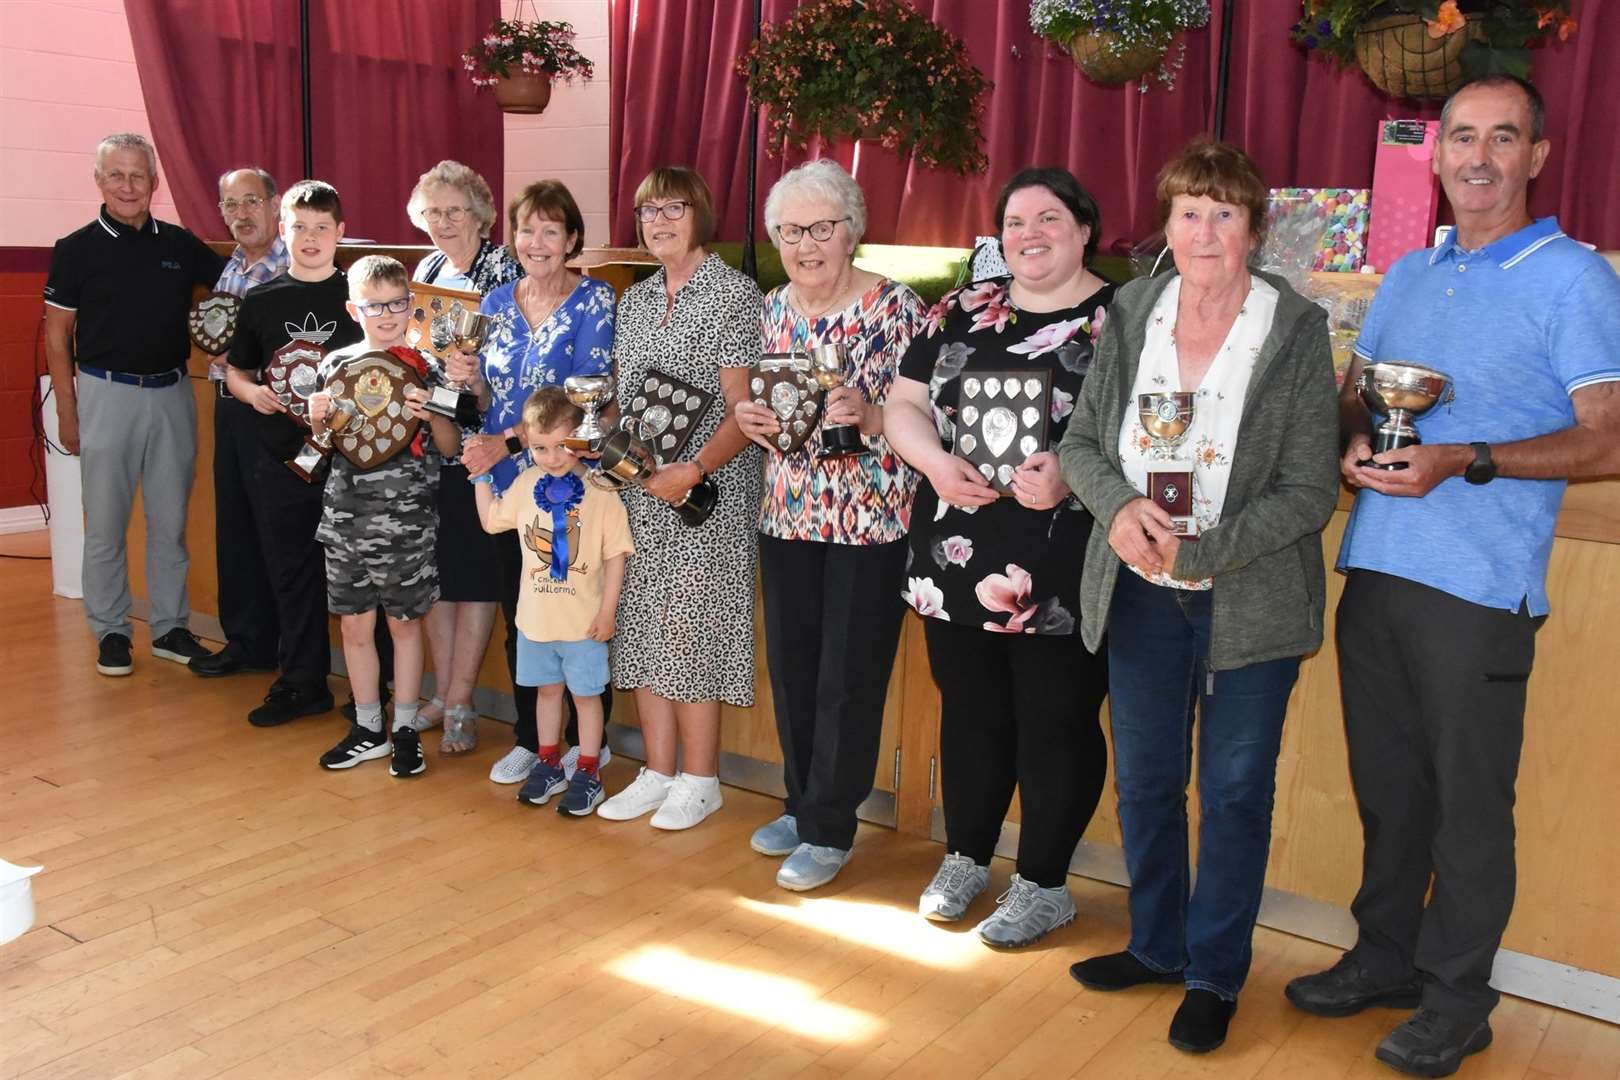 This year's prize winners at Cruden Bay Flower Show